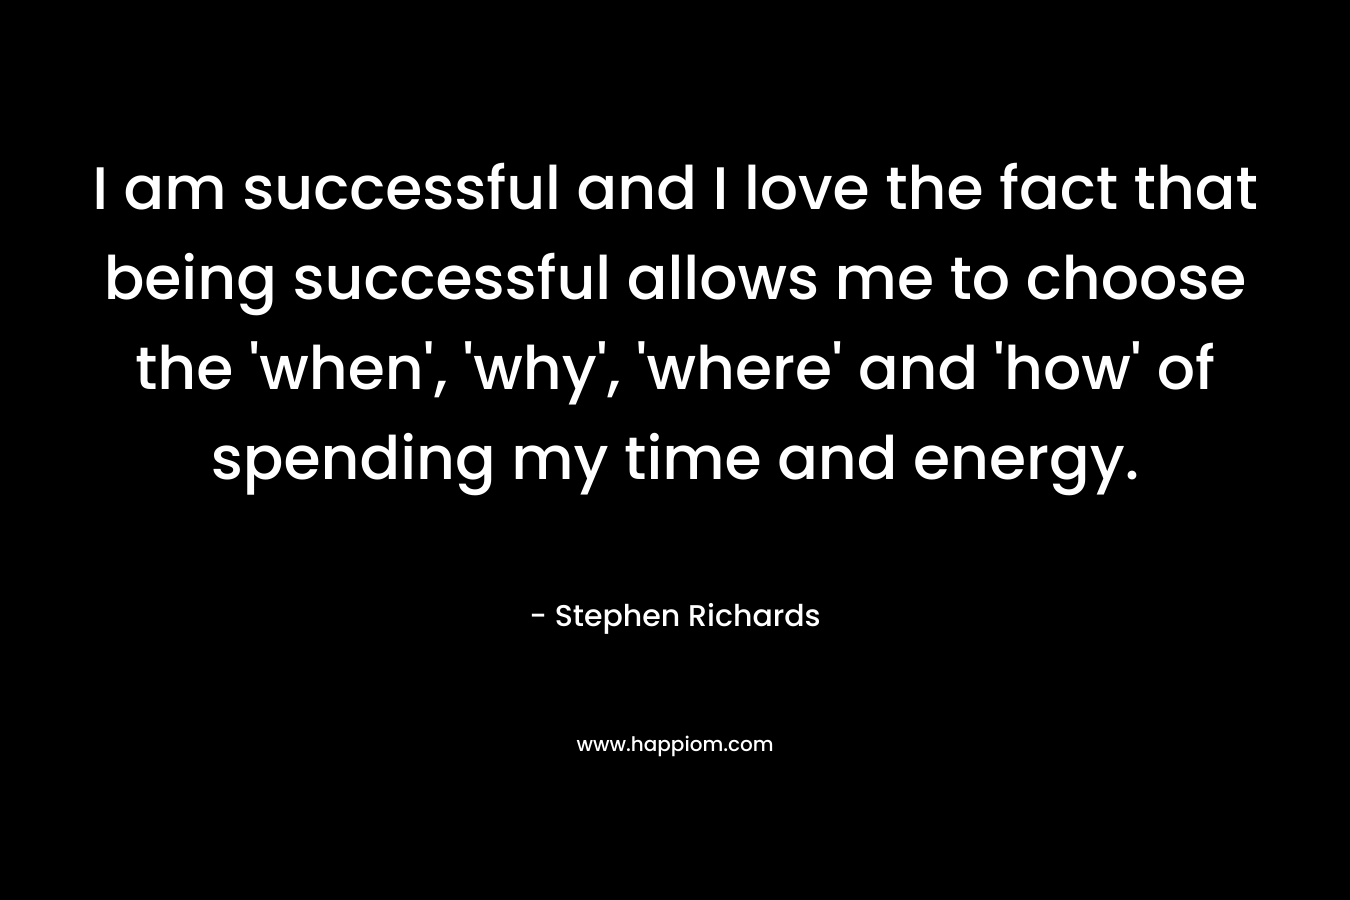 I am successful and I love the fact that being successful allows me to choose the 'when', 'why', 'where' and 'how' of spending my time and energy.